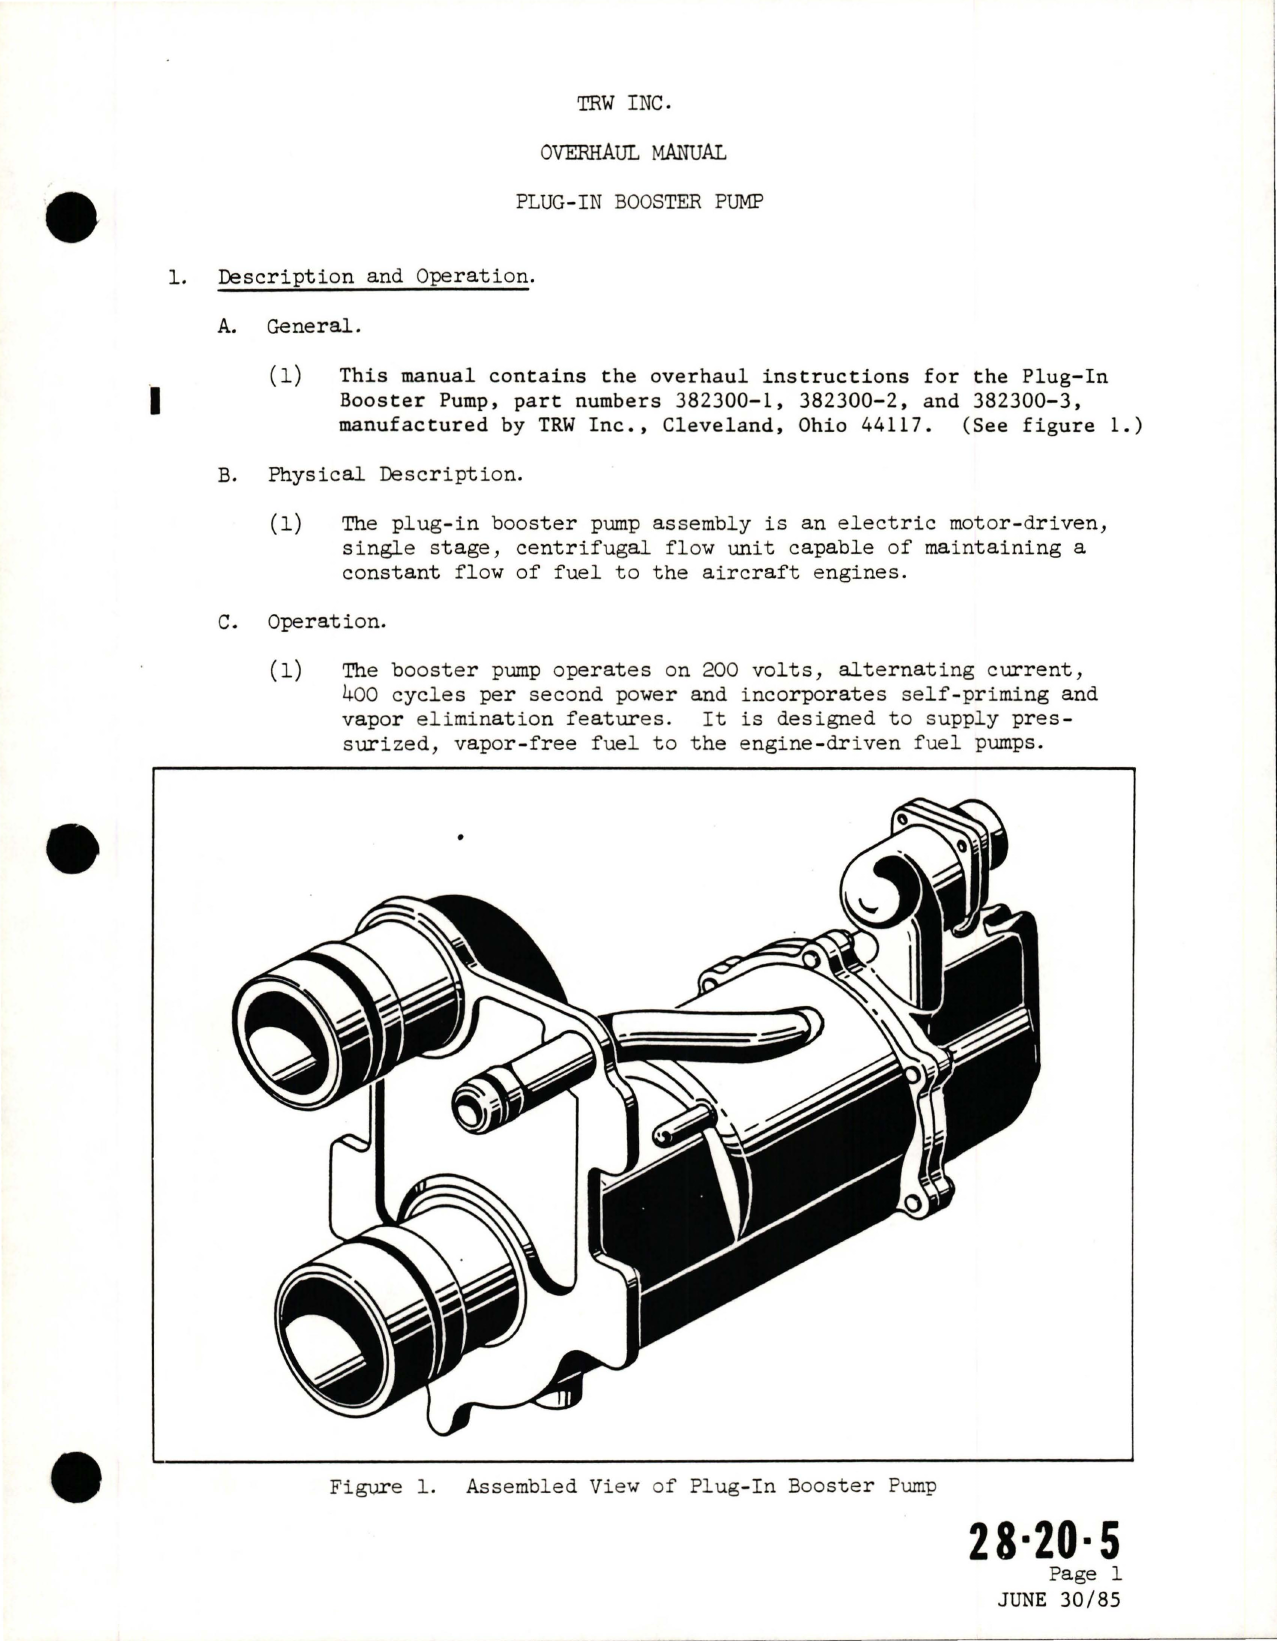 Sample page 9 from AirCorps Library document: Overhaul with Illustrated Parts Catalog for Plug-In Booster Pump - 382300-1, 382300-2, and 3823020-3 